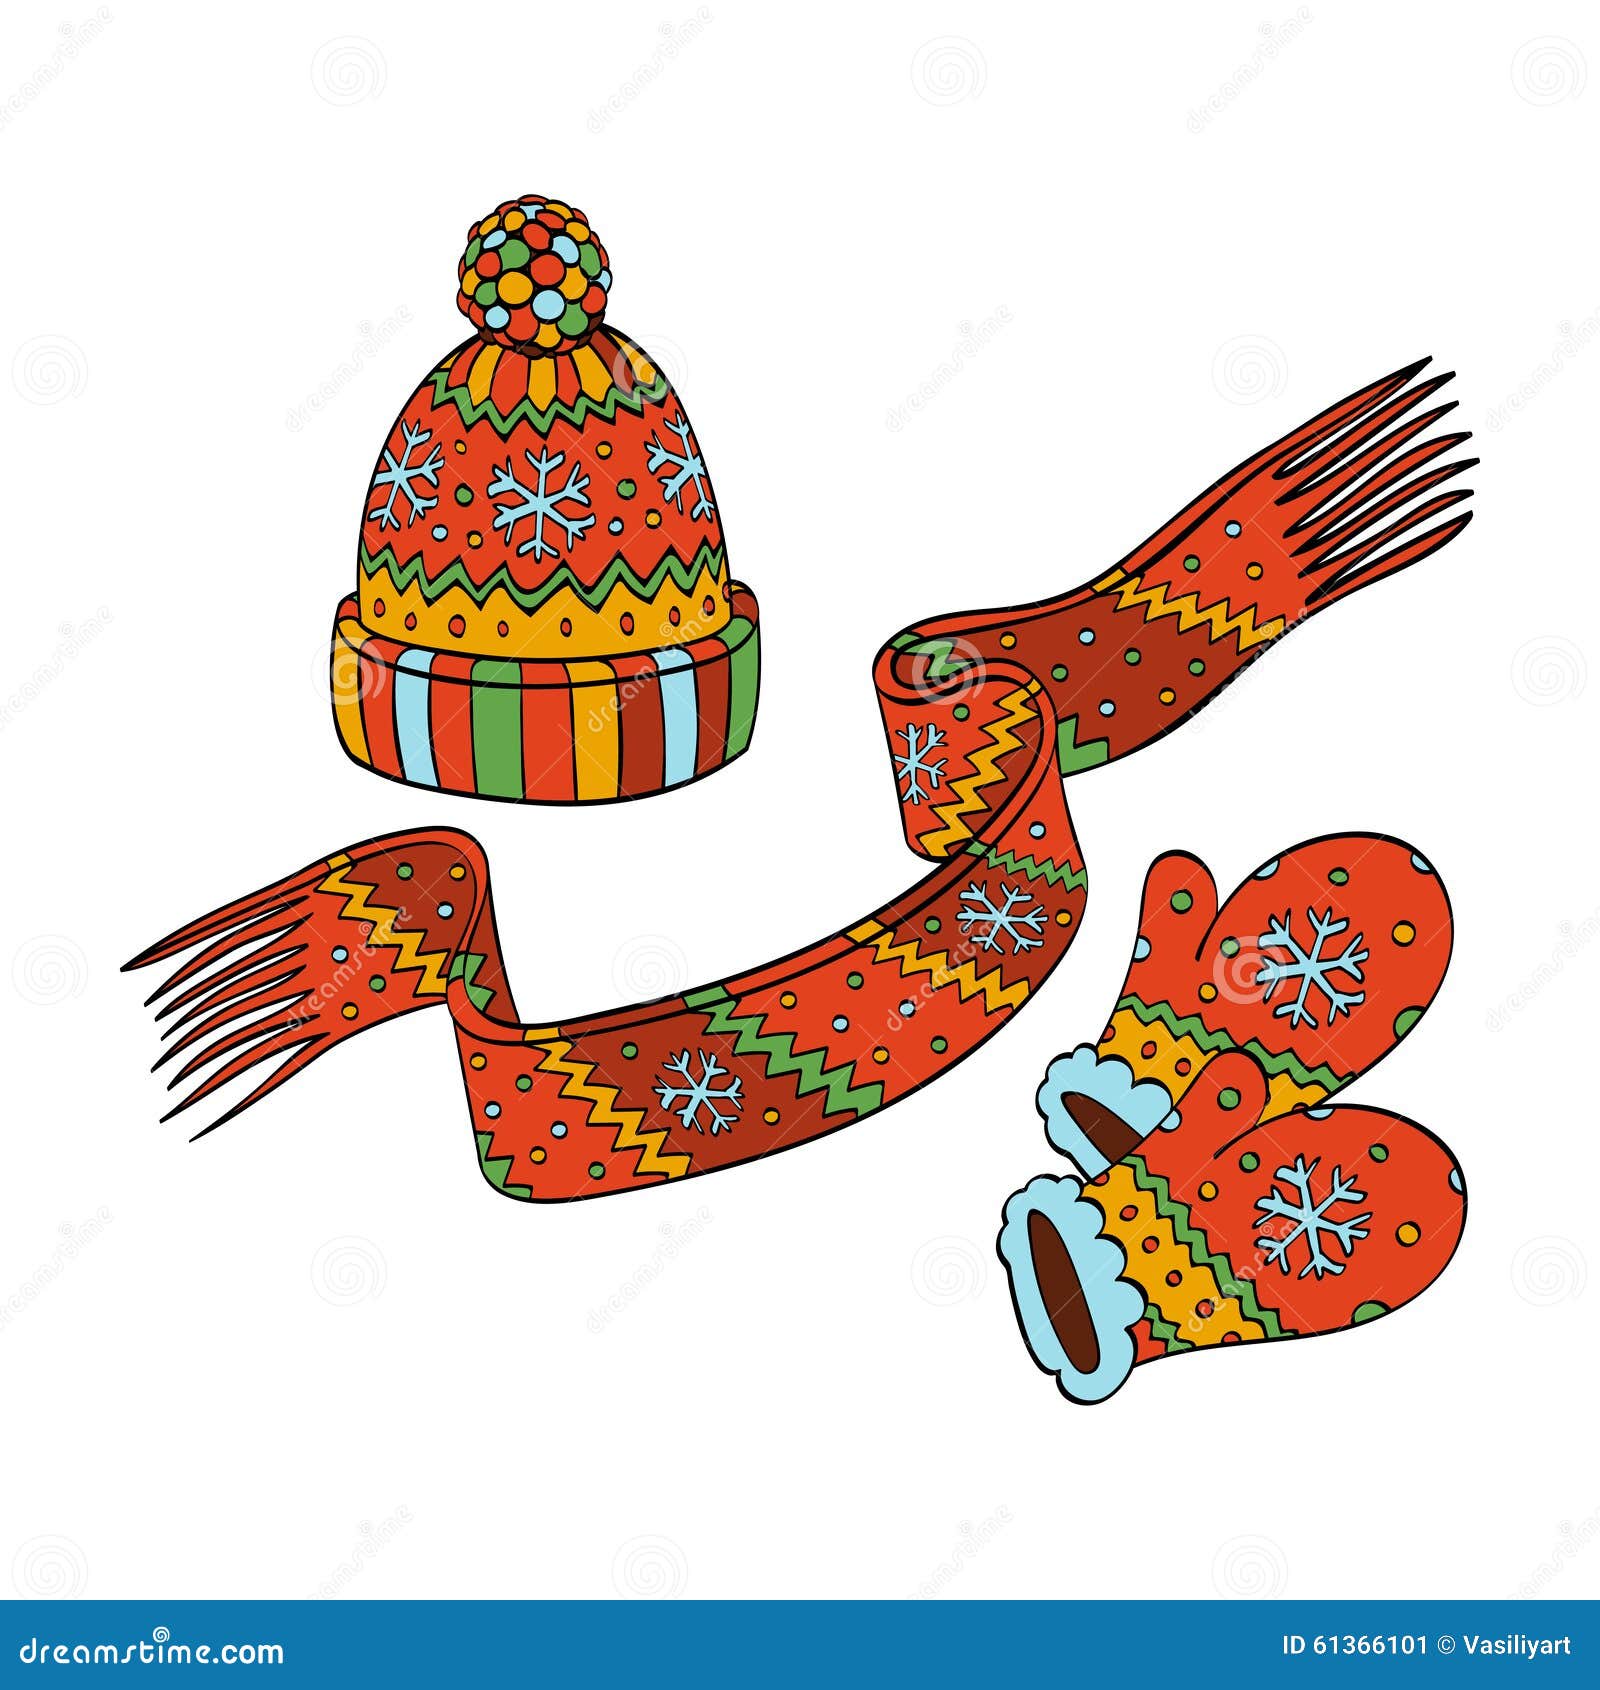 hat and scarf clipart - photo #8